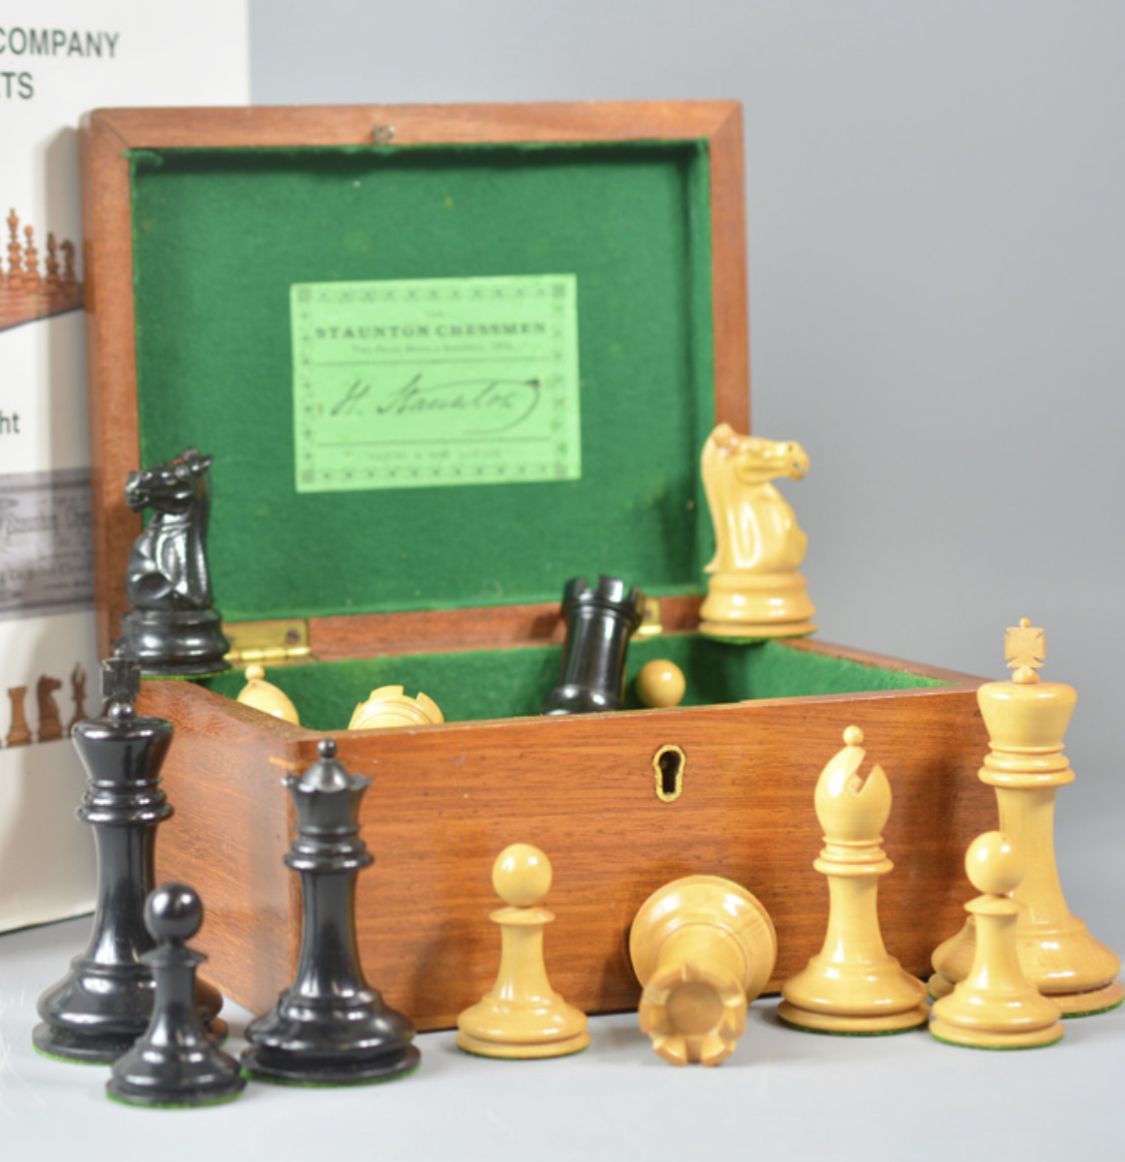 Custom board picture and pieces - Chess Forums 